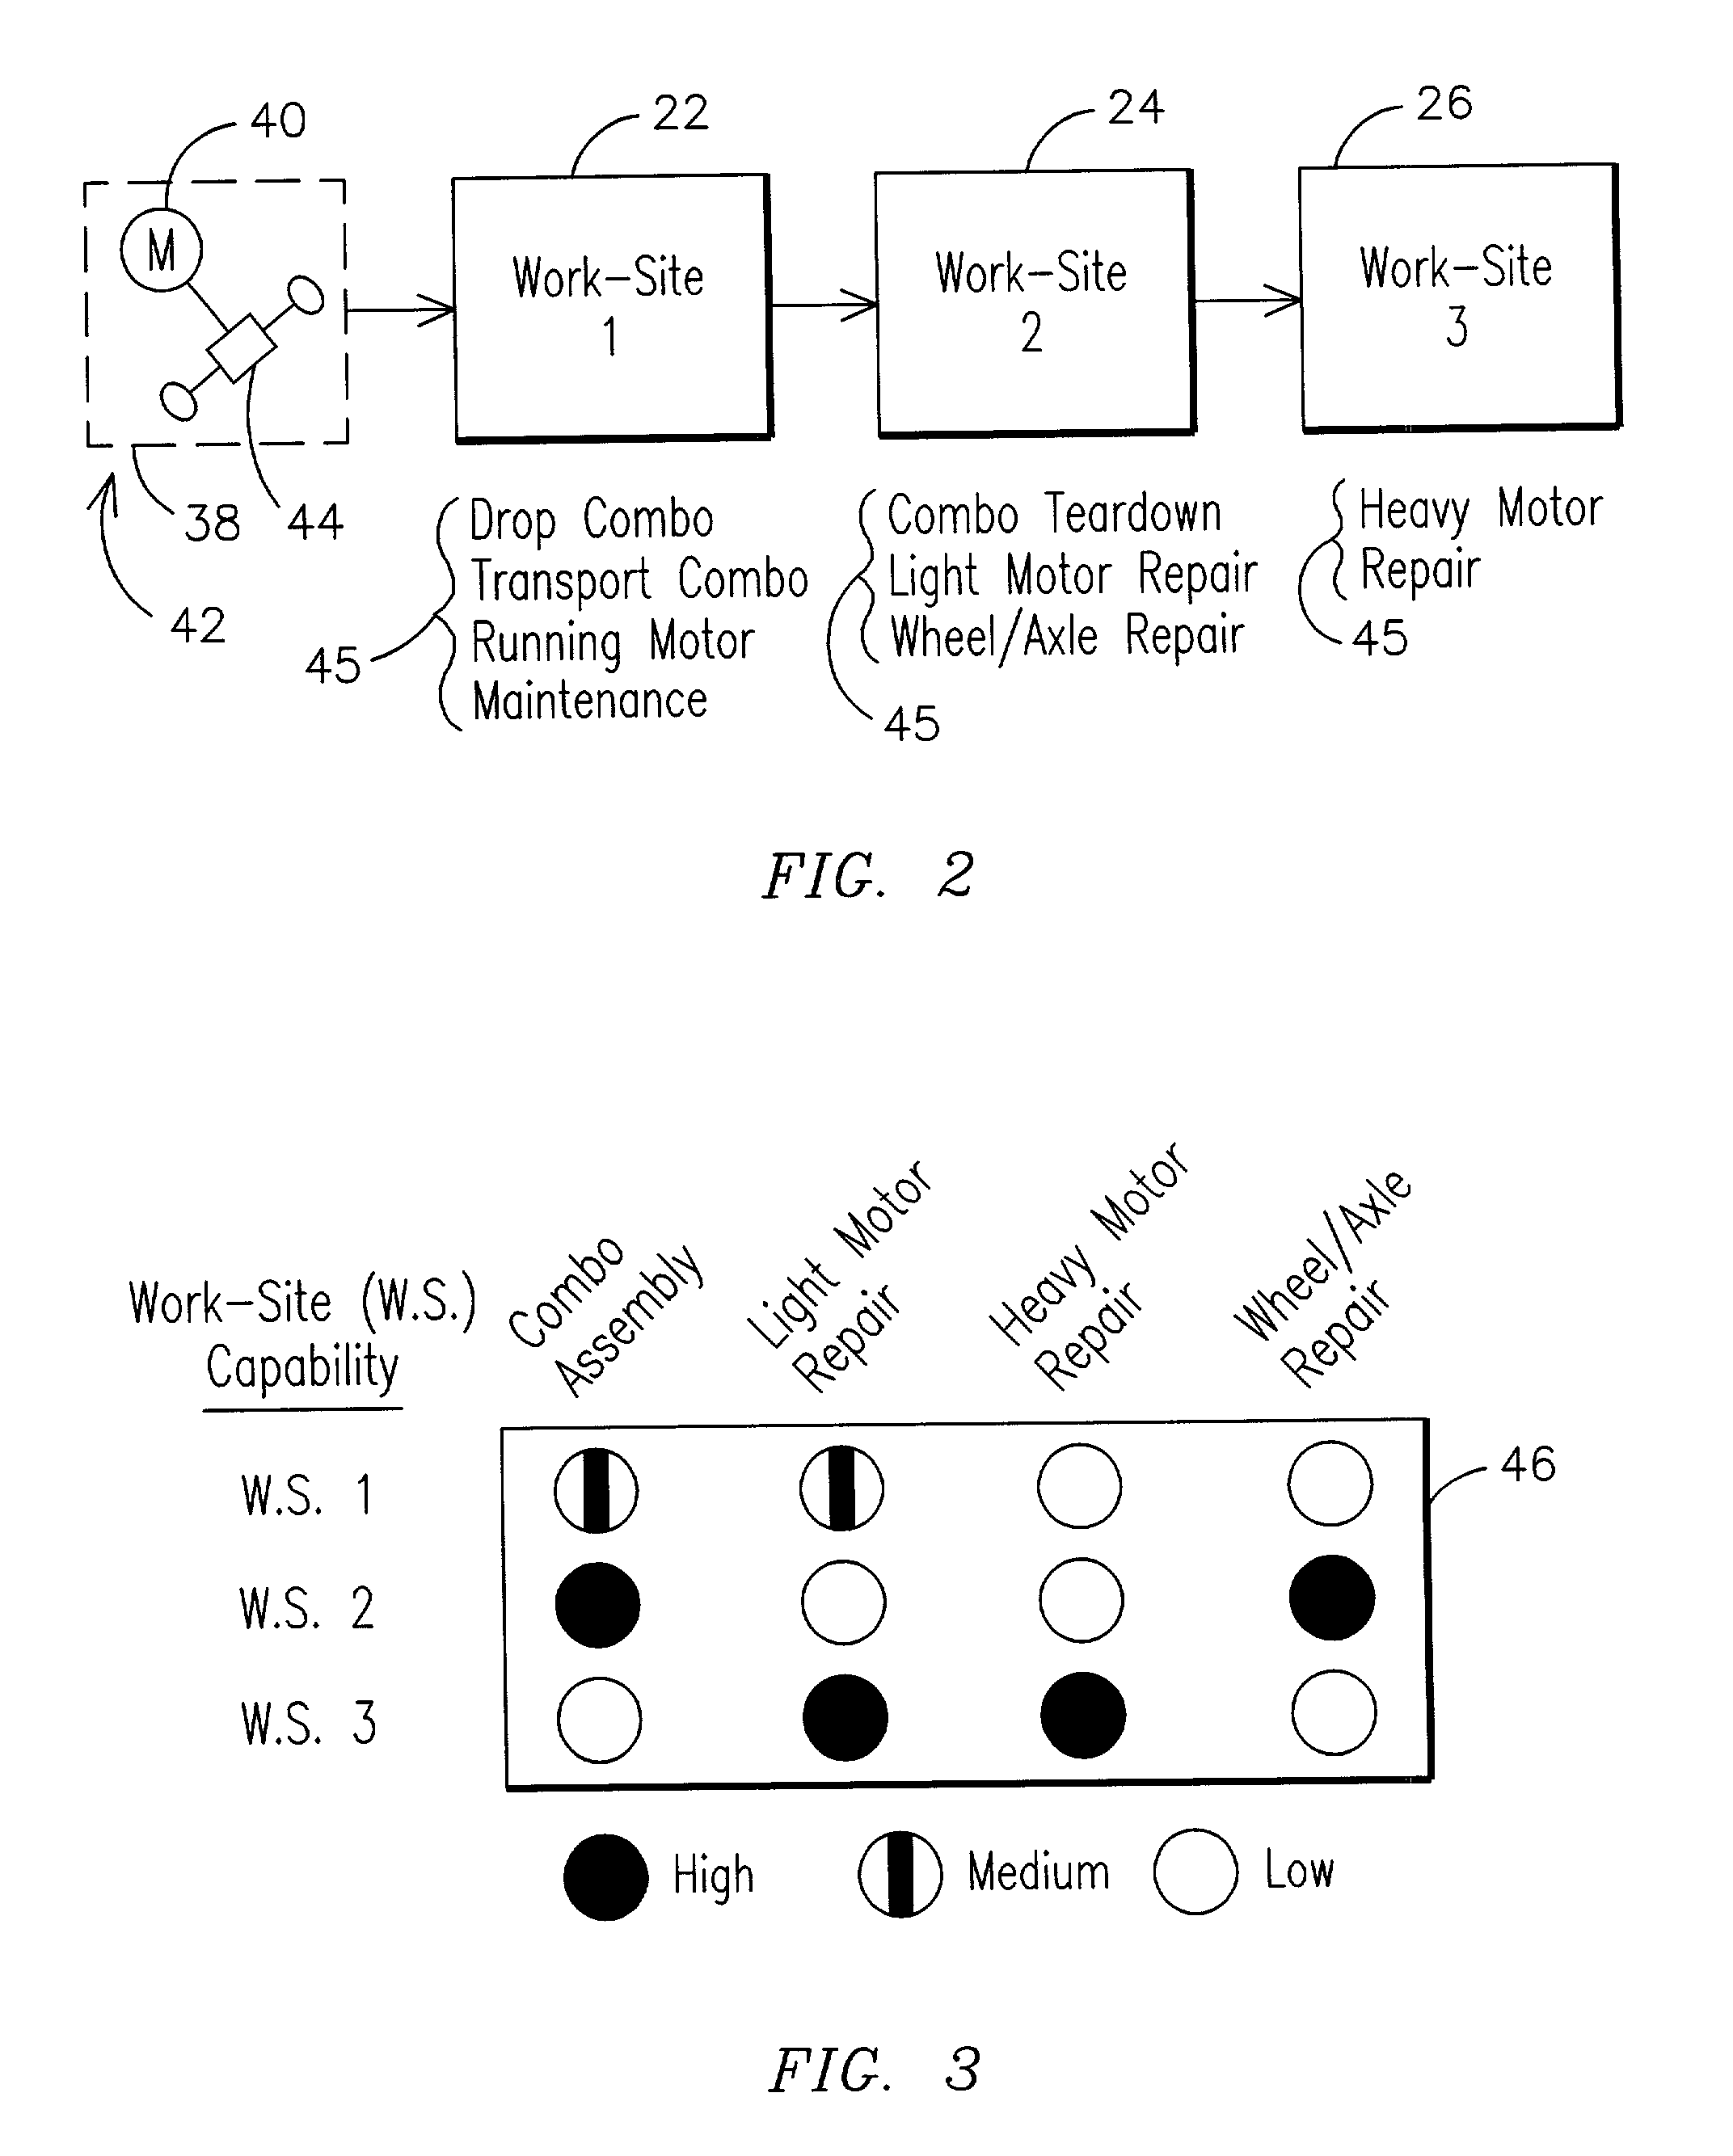 Computerized method and system for guiding service personnel to select a preferred work site for servicing transportation equipment